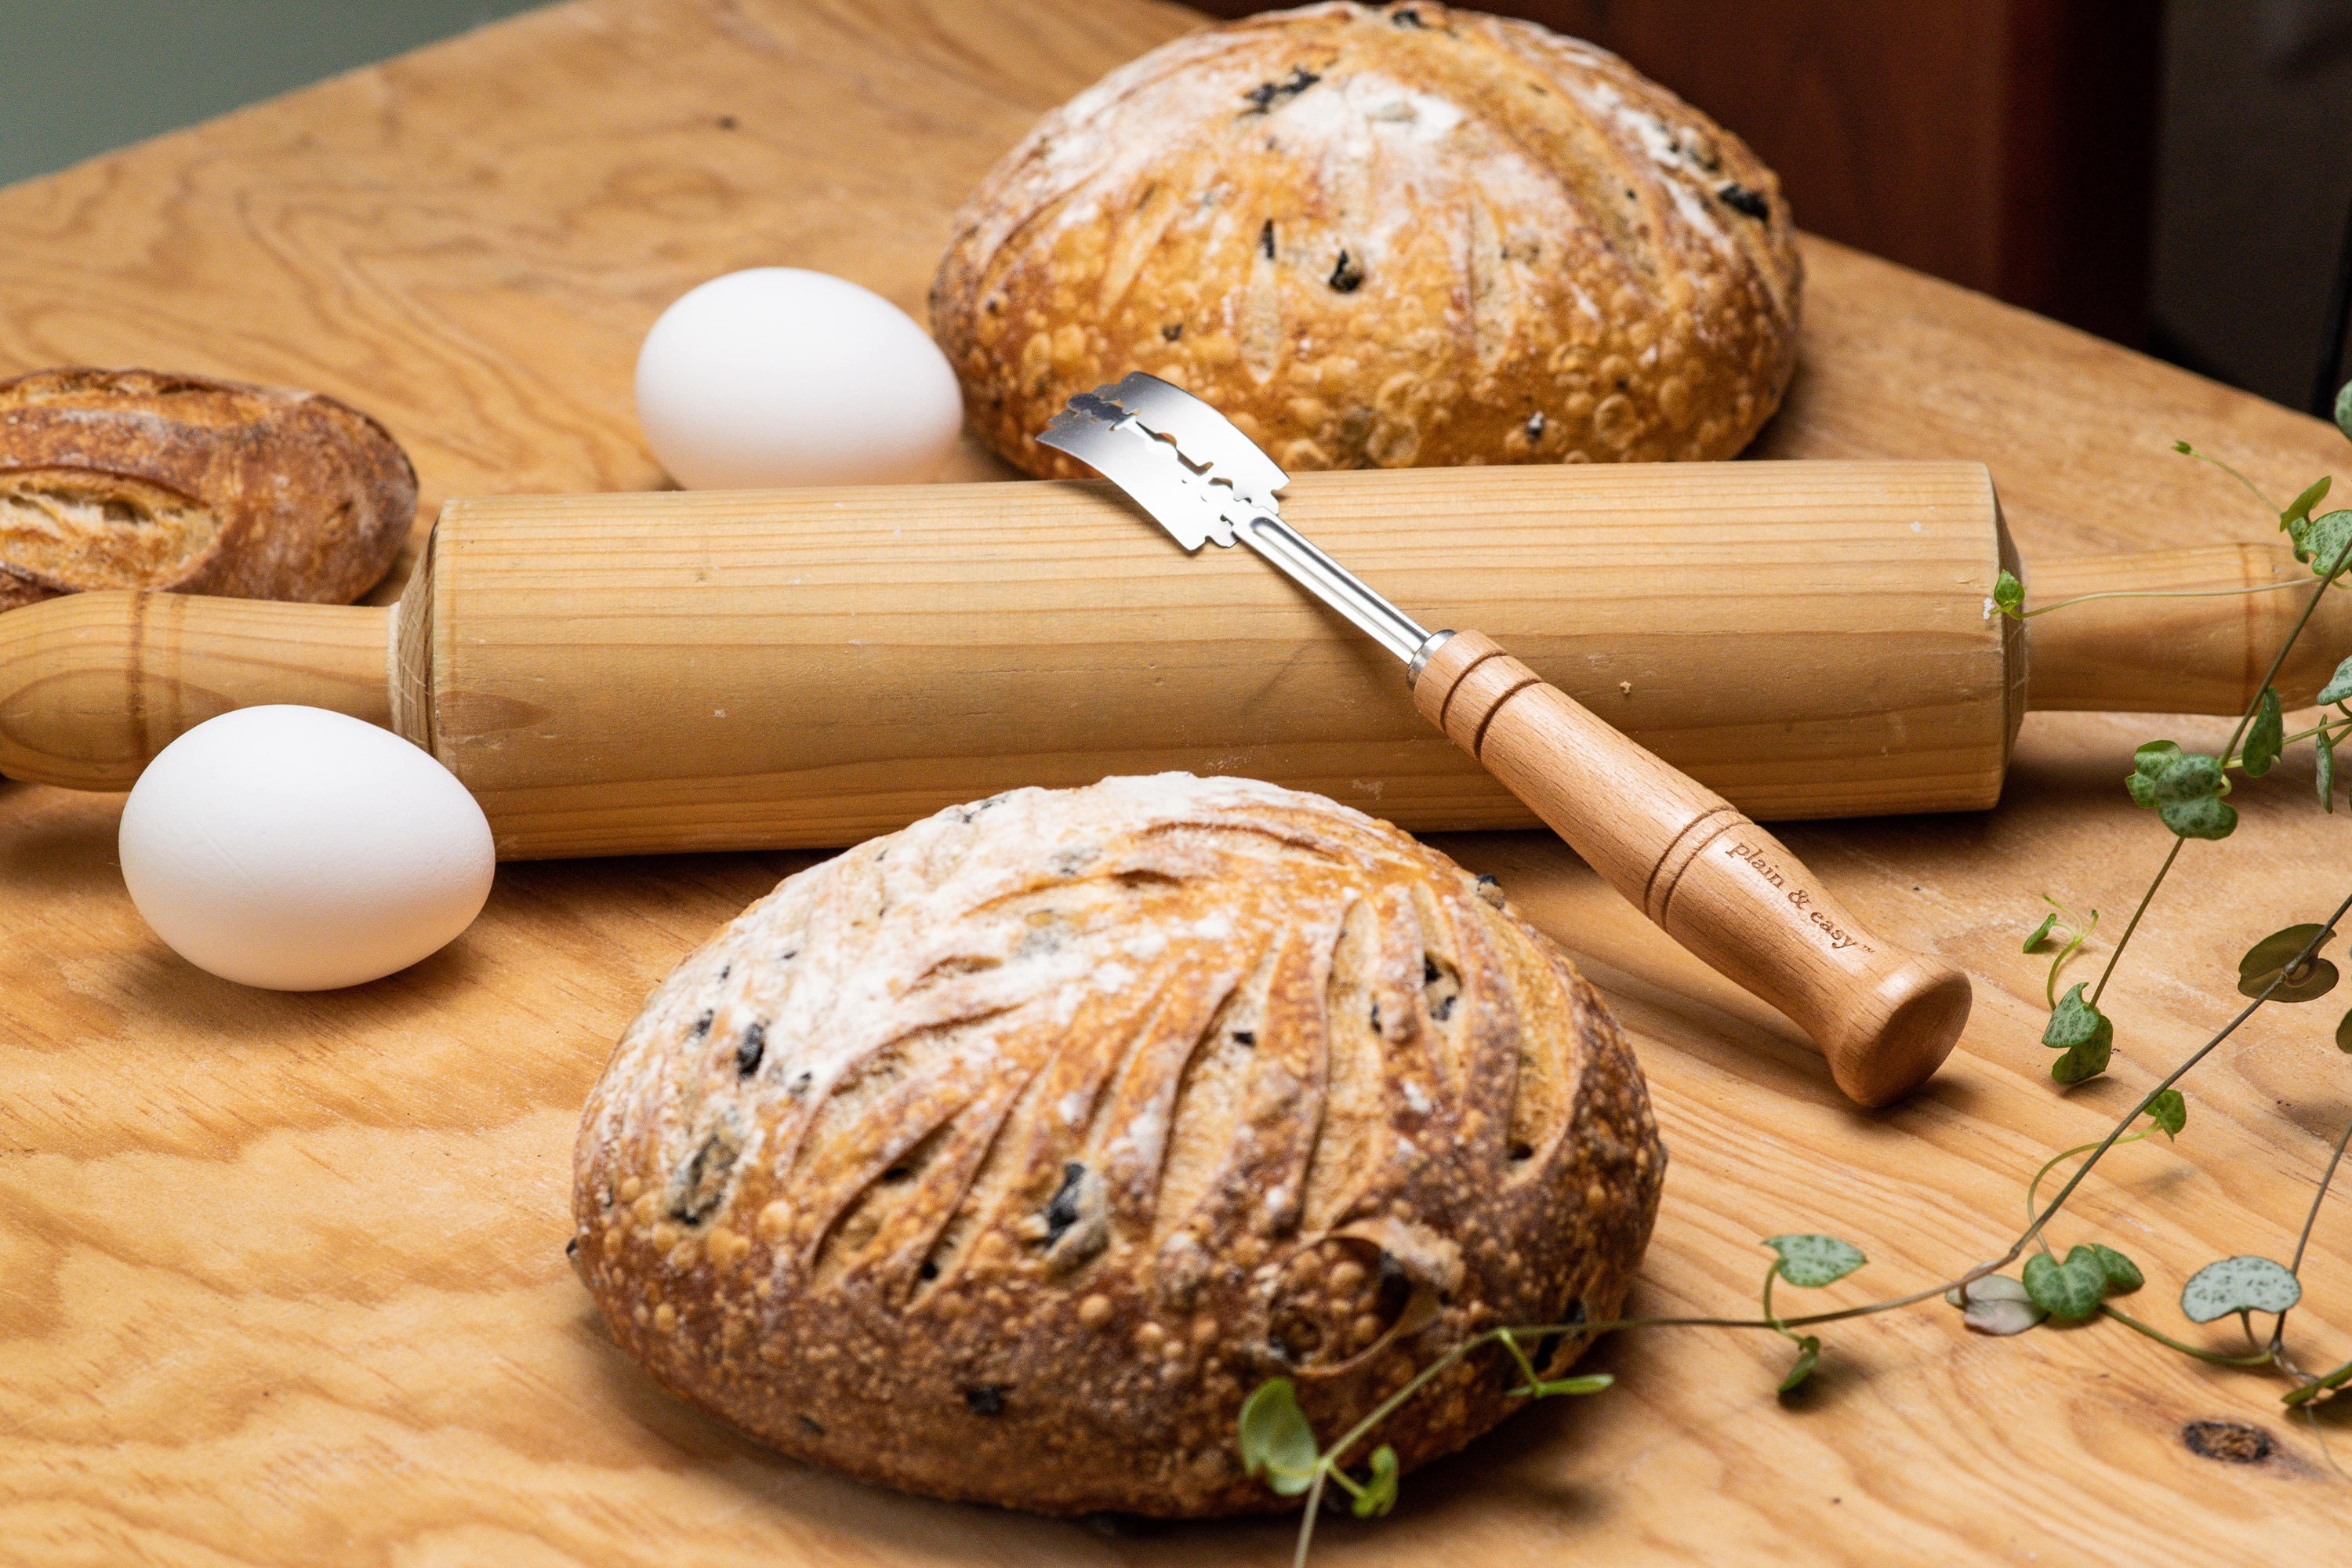 High Quality Stainless Steel Bread Lame With Wooden Handle, Arc